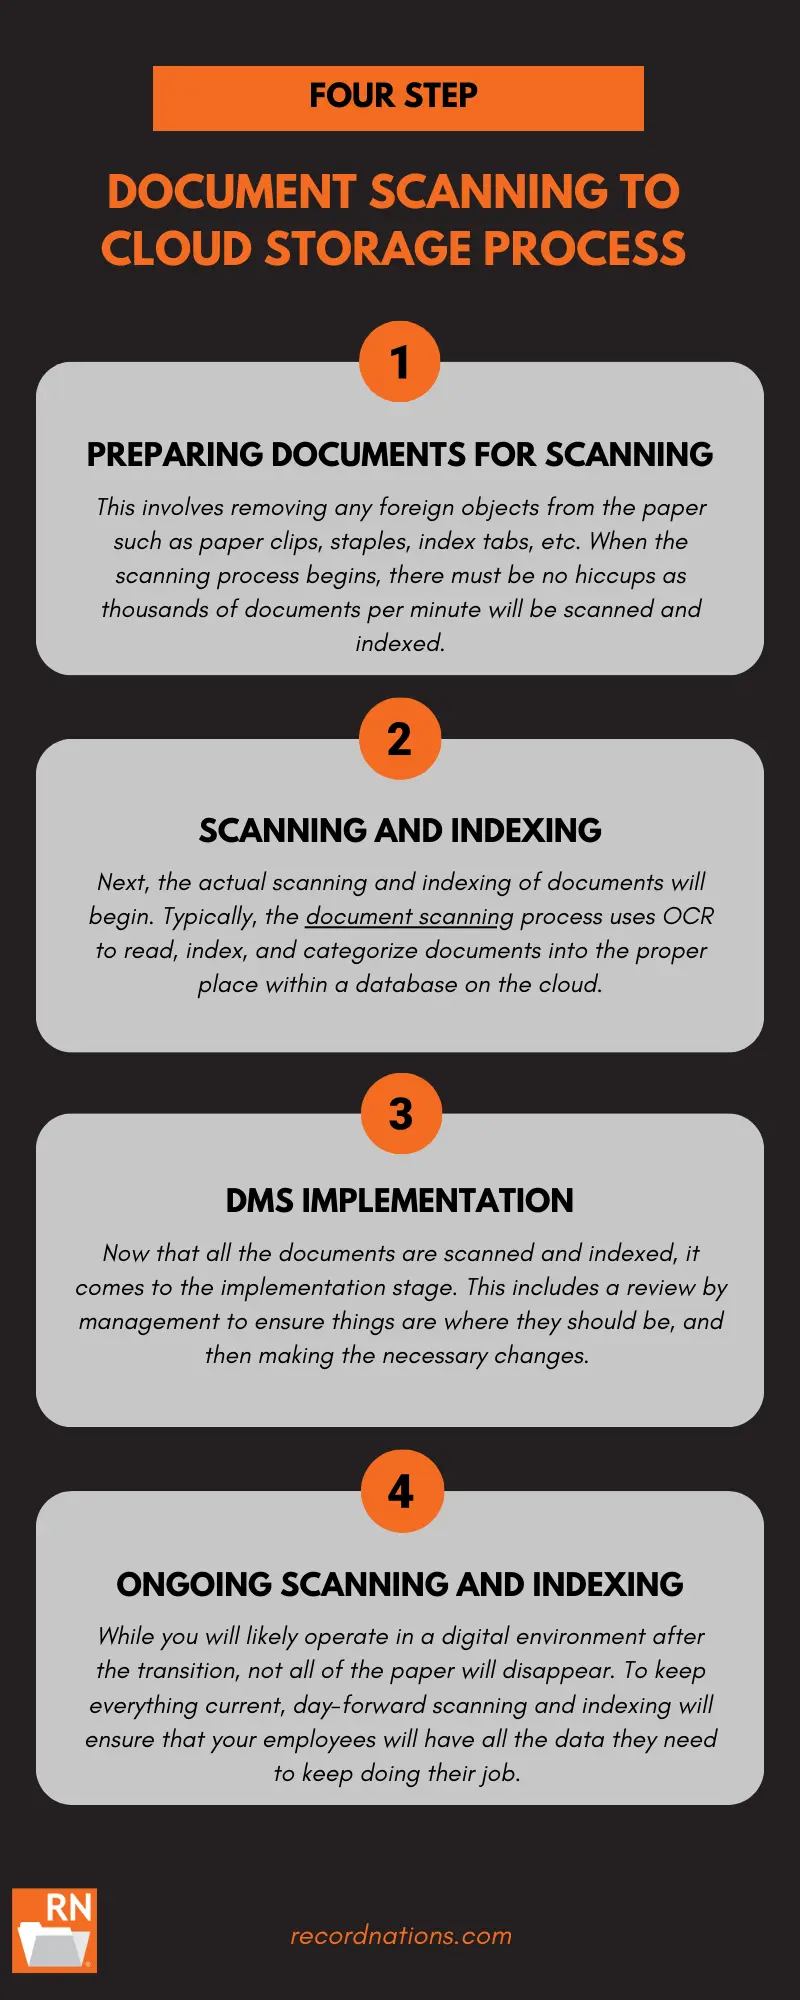 document scanning and cloud storage process